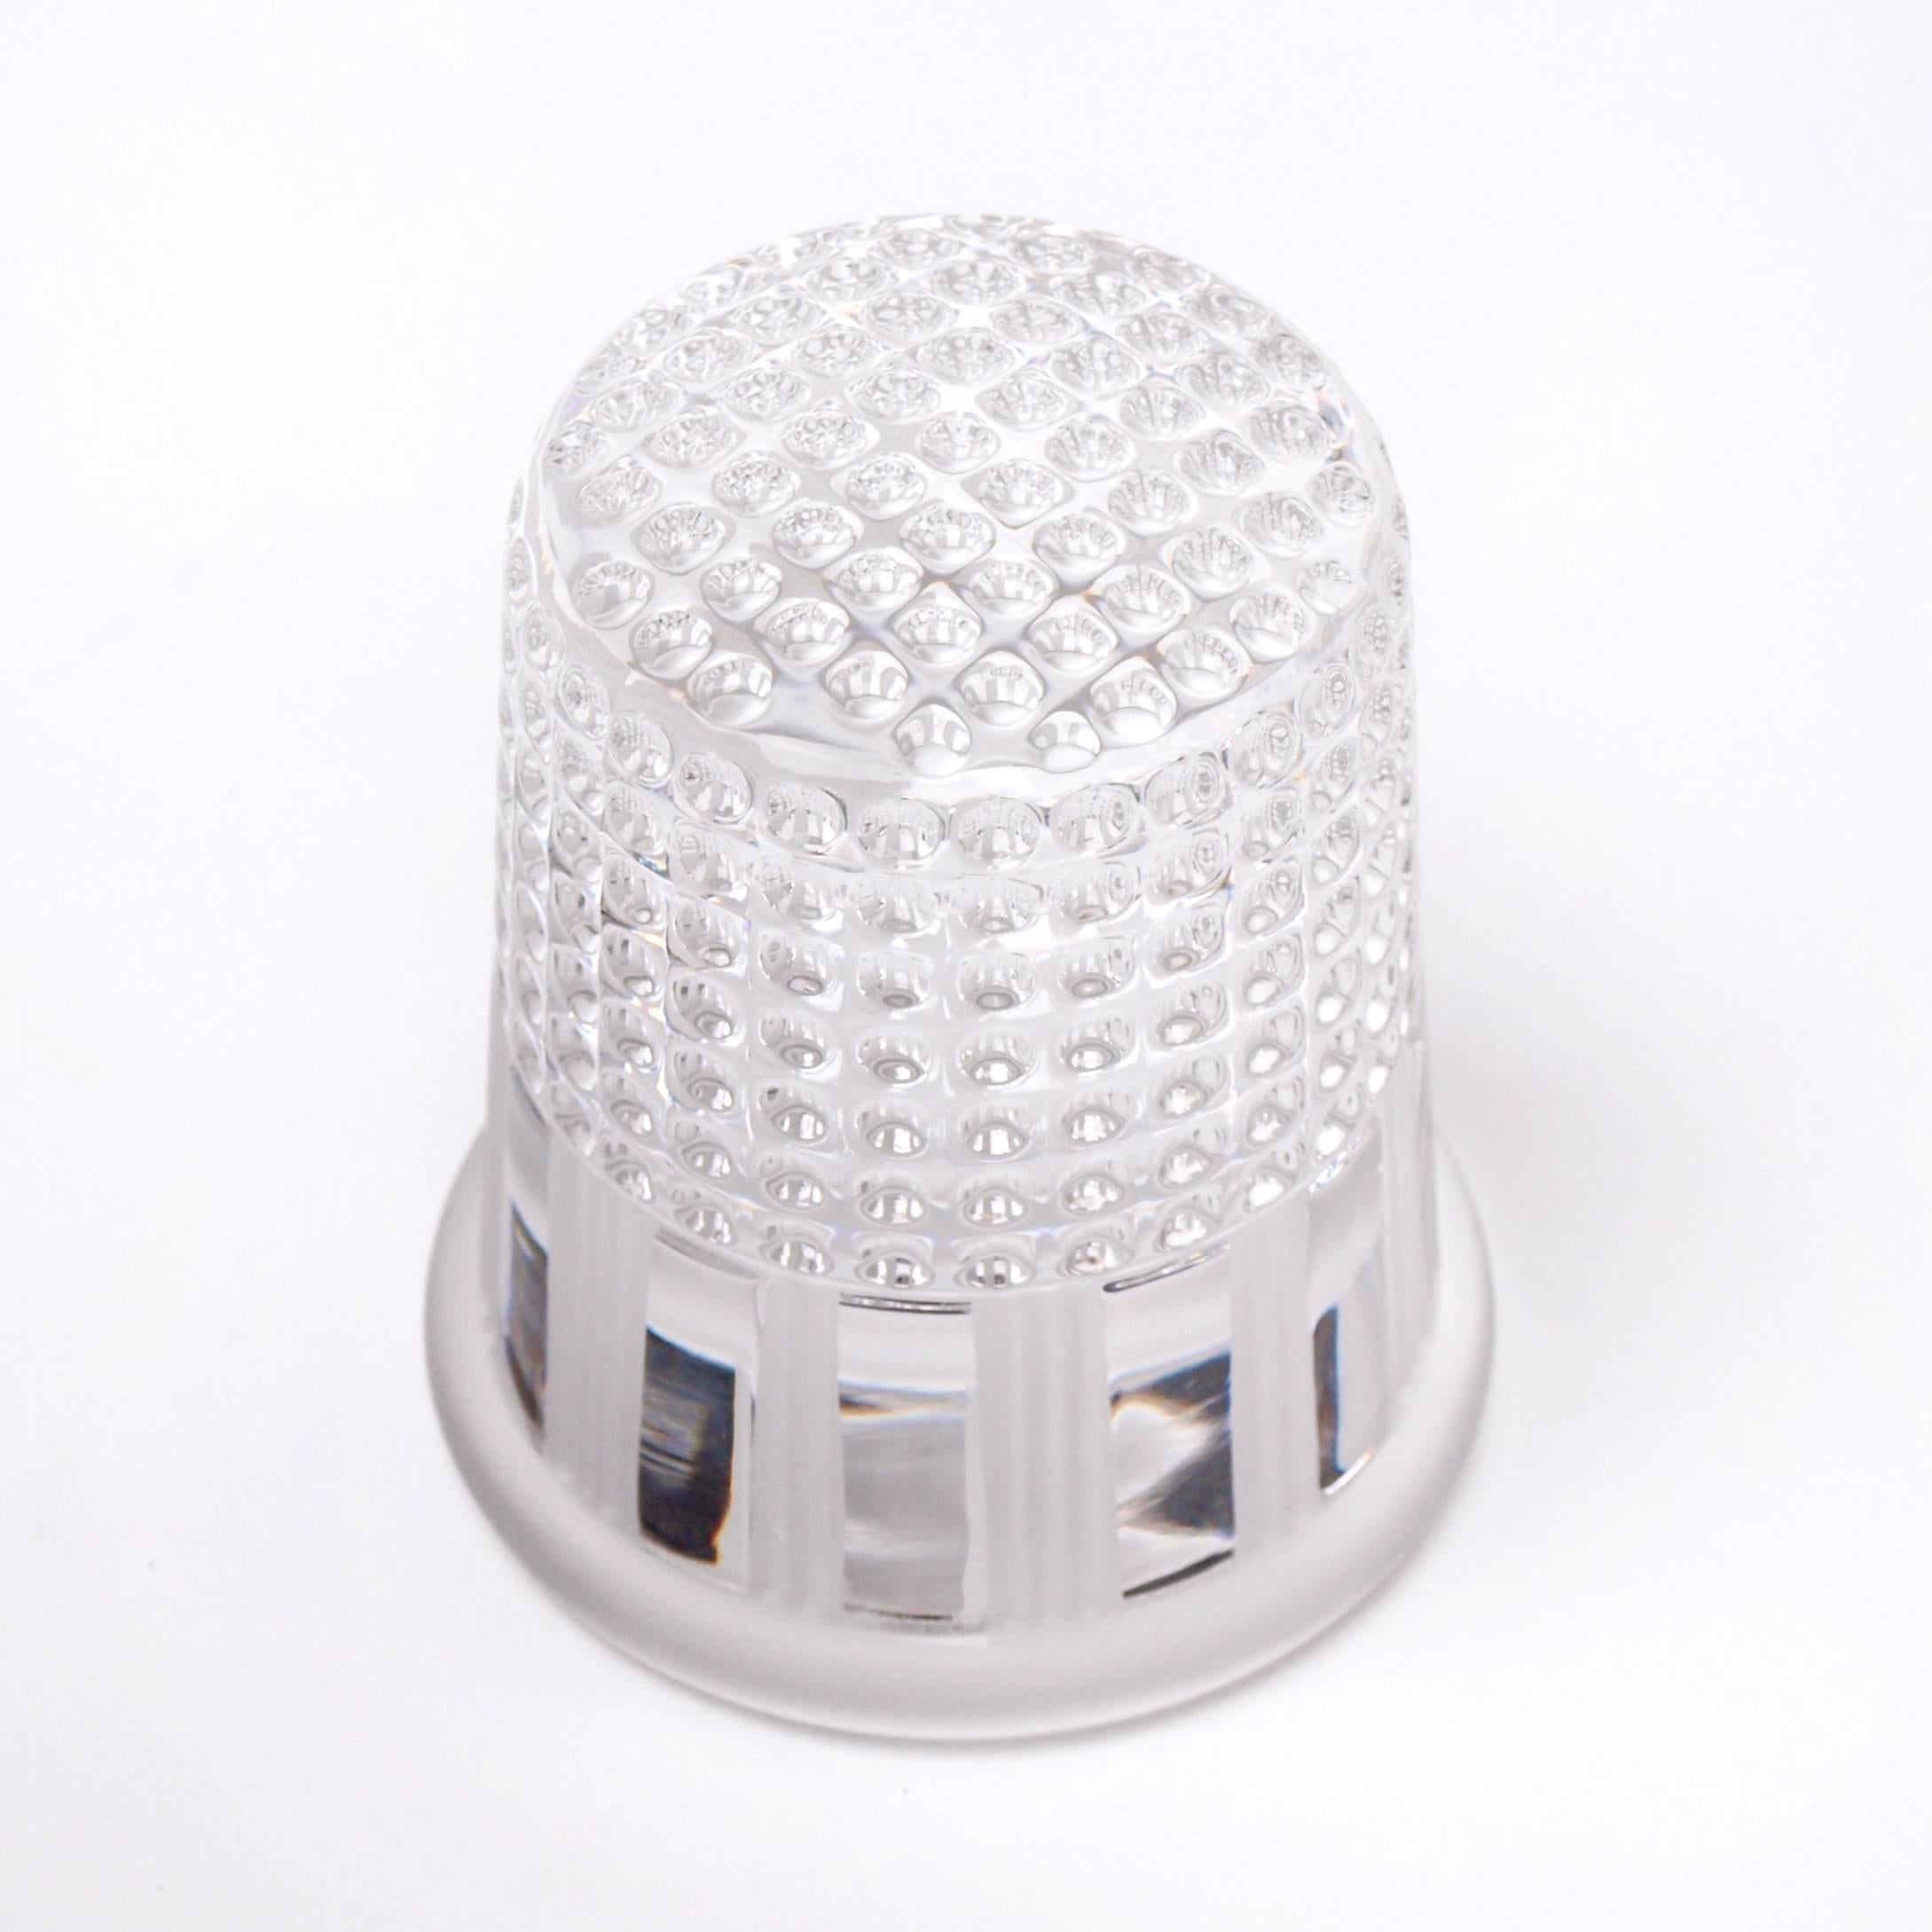 A 1970s paperweight by Christian Dior for French crystal glass manufacture, Crystal Au Plomb. The paperweight features a glossy perforated surface towards the top, imitating that of a thimble, with an alternating frosted scalloped design surrounding